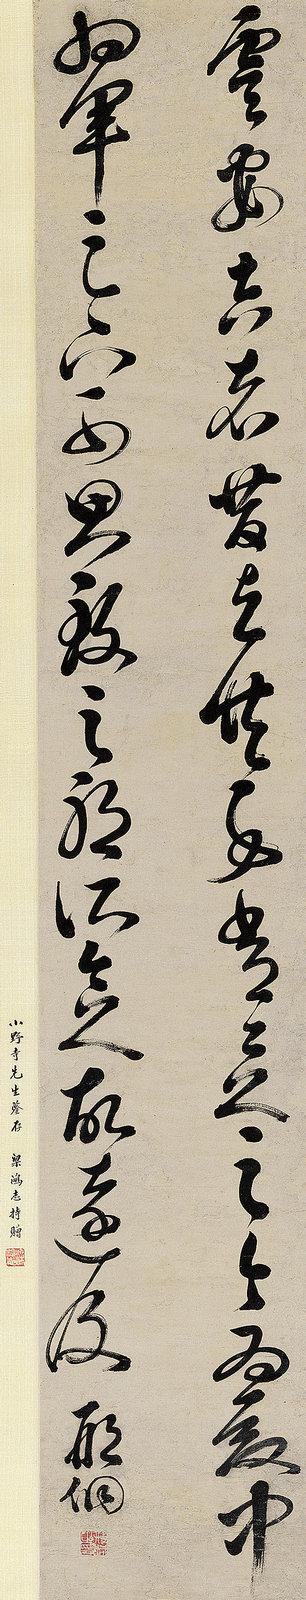 Calligraphy in Cursive Script by 
																	 Xing Dong